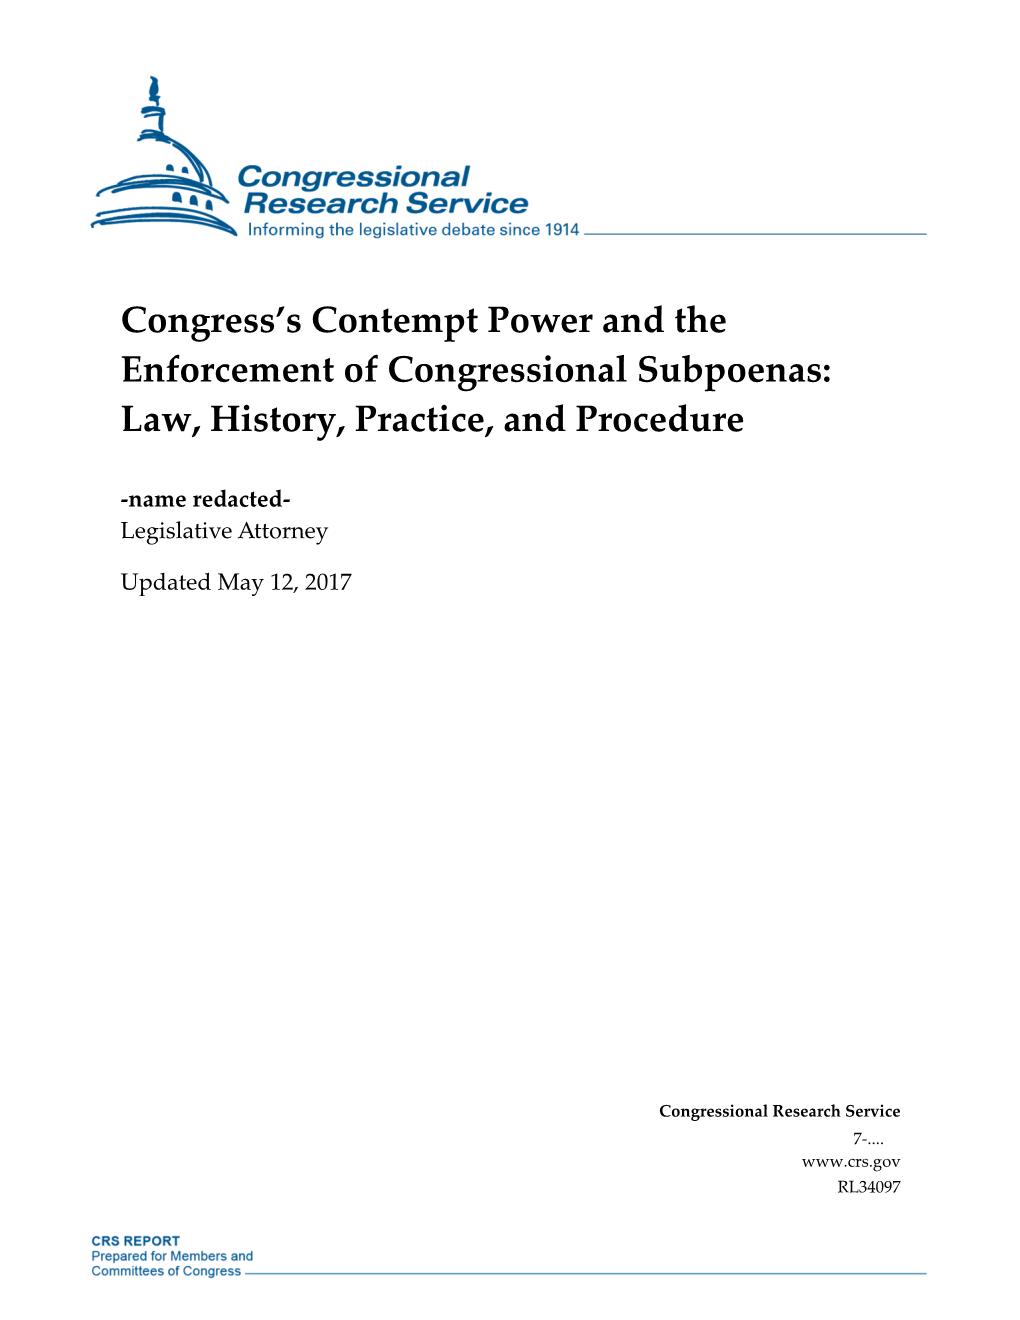 Congress's Contempt Power and the Enforcement Of